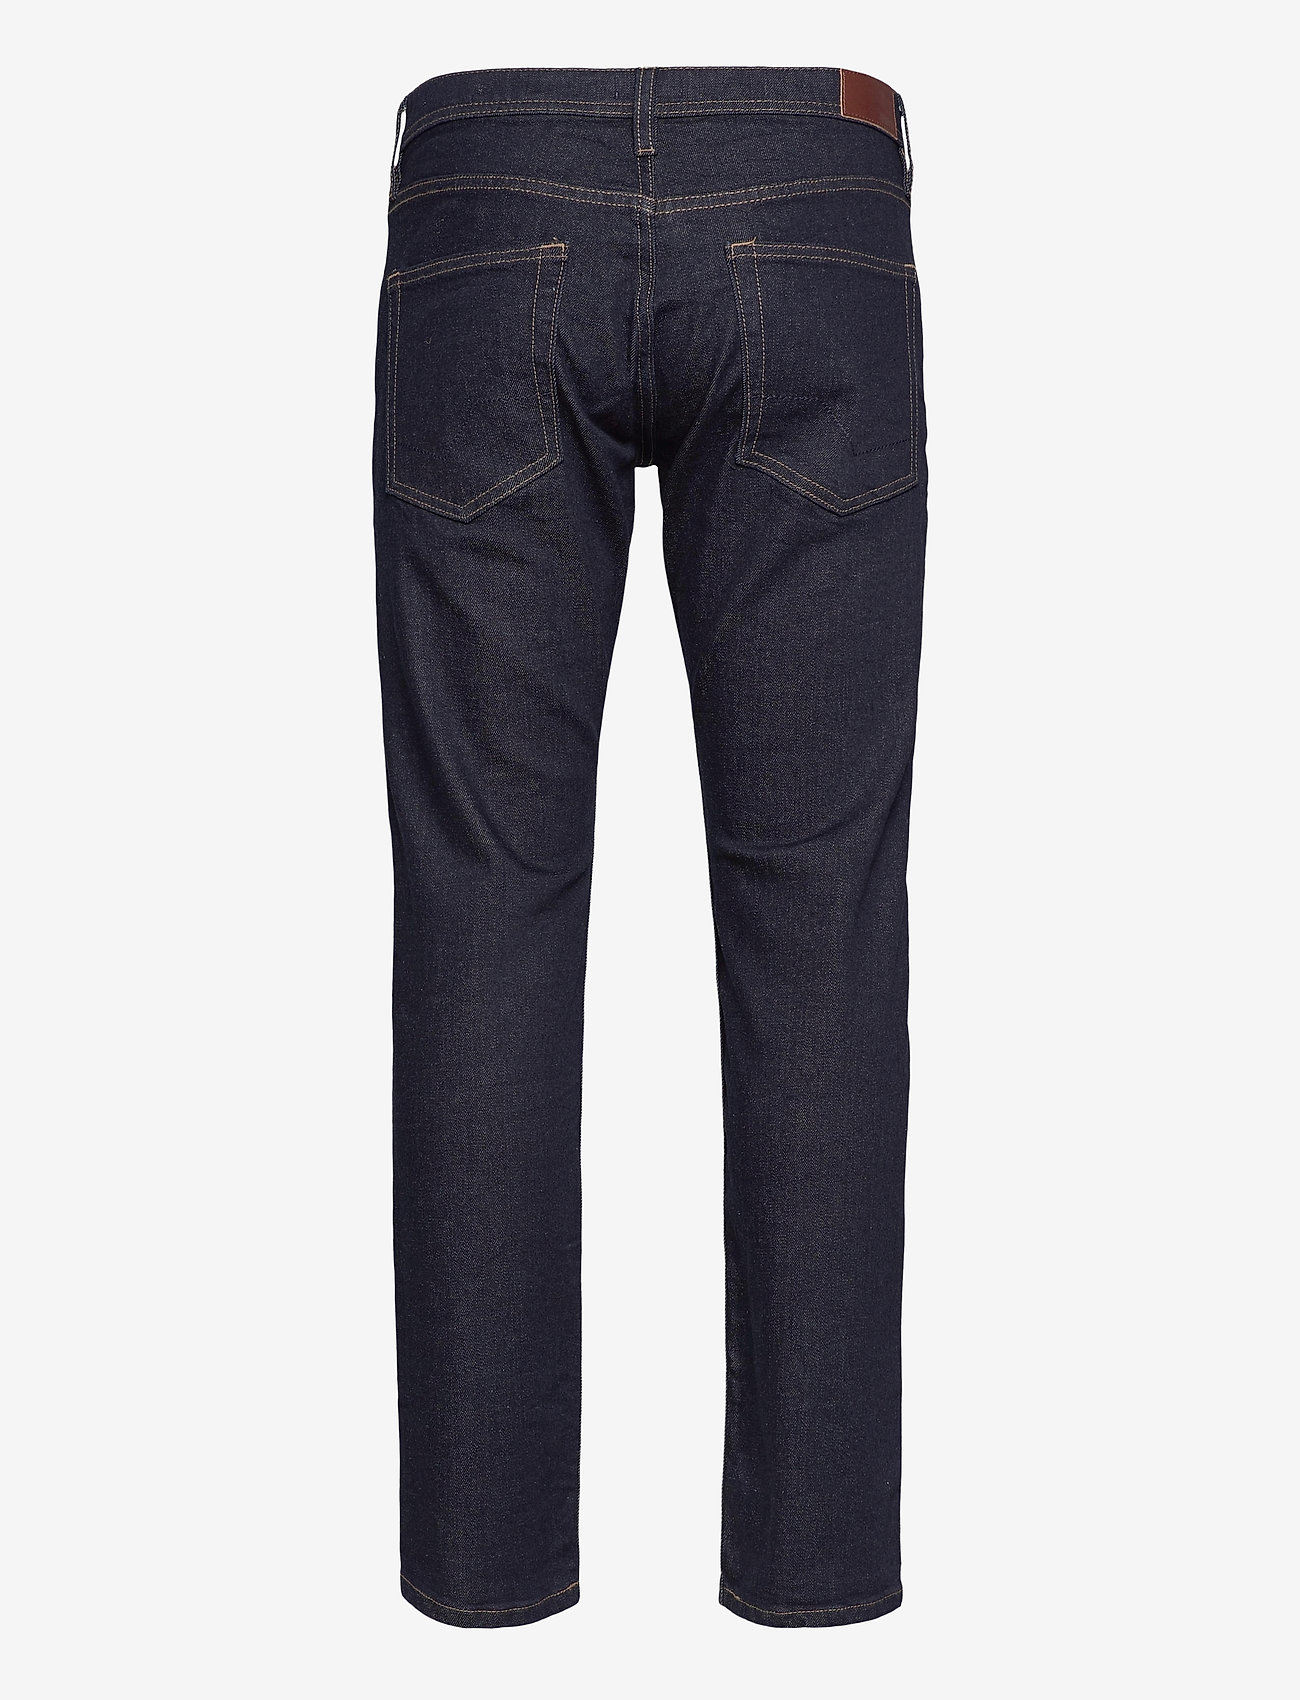 Esprit Casual - Pants denim - relaxed jeans - blue rinse - 1